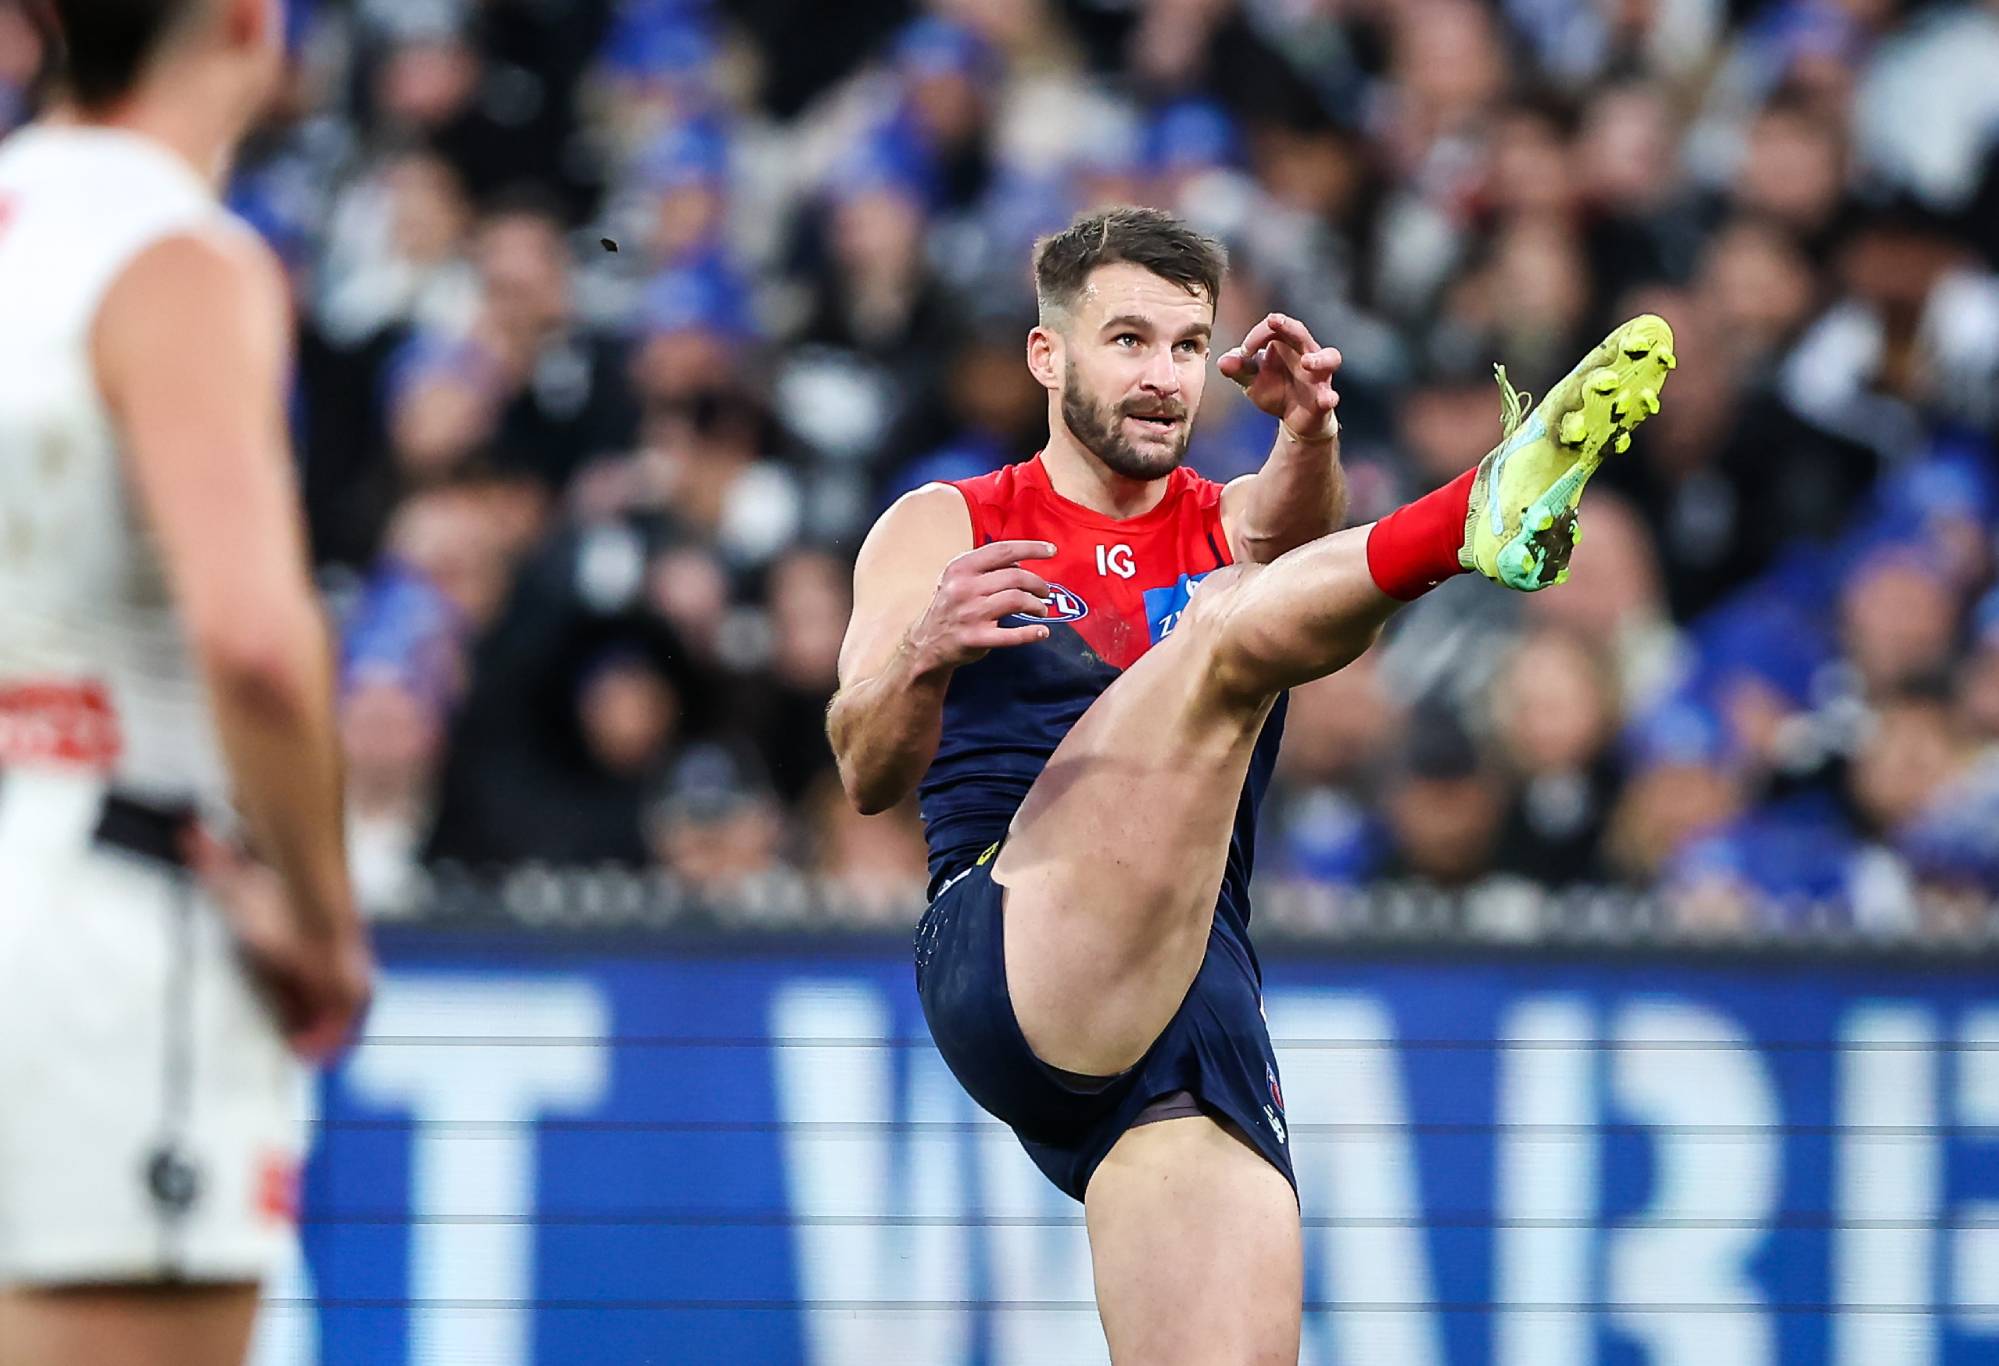 MELBOURNE, AUSTRALIA - JUNE 12: Joel Smith of the Demons kicks the ball during the 2023 AFL Round 13 match between the Melbourne Demons and the Collingwood Magpies at the Melbourne Cricket Ground on June 12, 2023 in Melbourne, Australia. (Photo by Dylan Burns/AFL Photos via Getty Images)